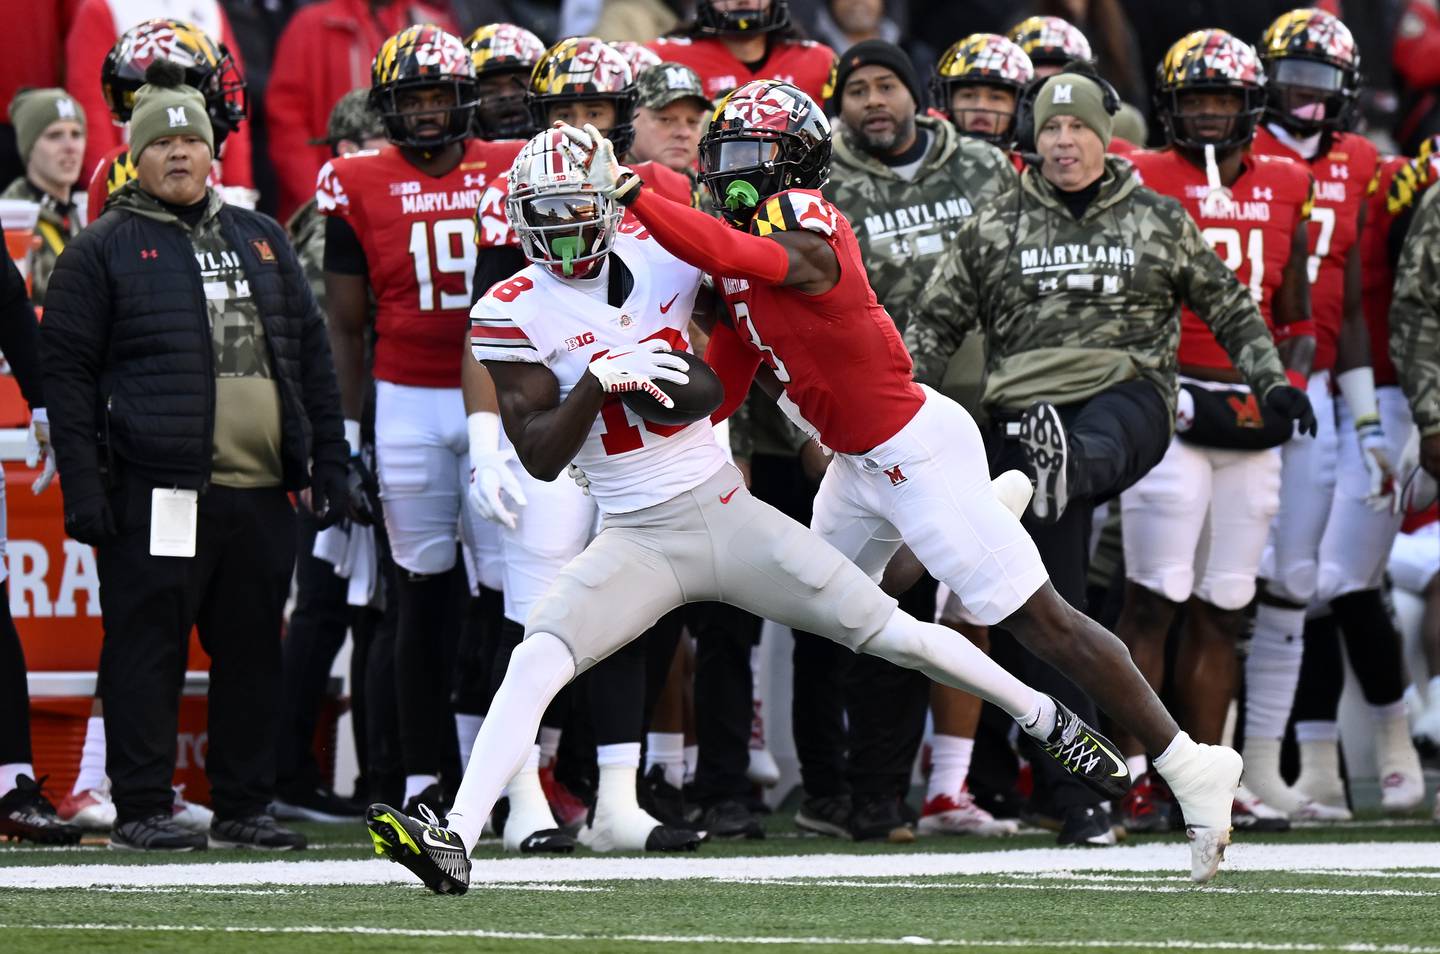 COLLEGE PARK, MARYLAND - NOVEMBER 19: Marvin Harrison Jr. #18 of the Ohio State Buckeyes makes a catch in the first quarter against Deonte Banks #3 of the Maryland Terrapins at SECU Stadium on November 19, 2022 in College Park, Maryland.